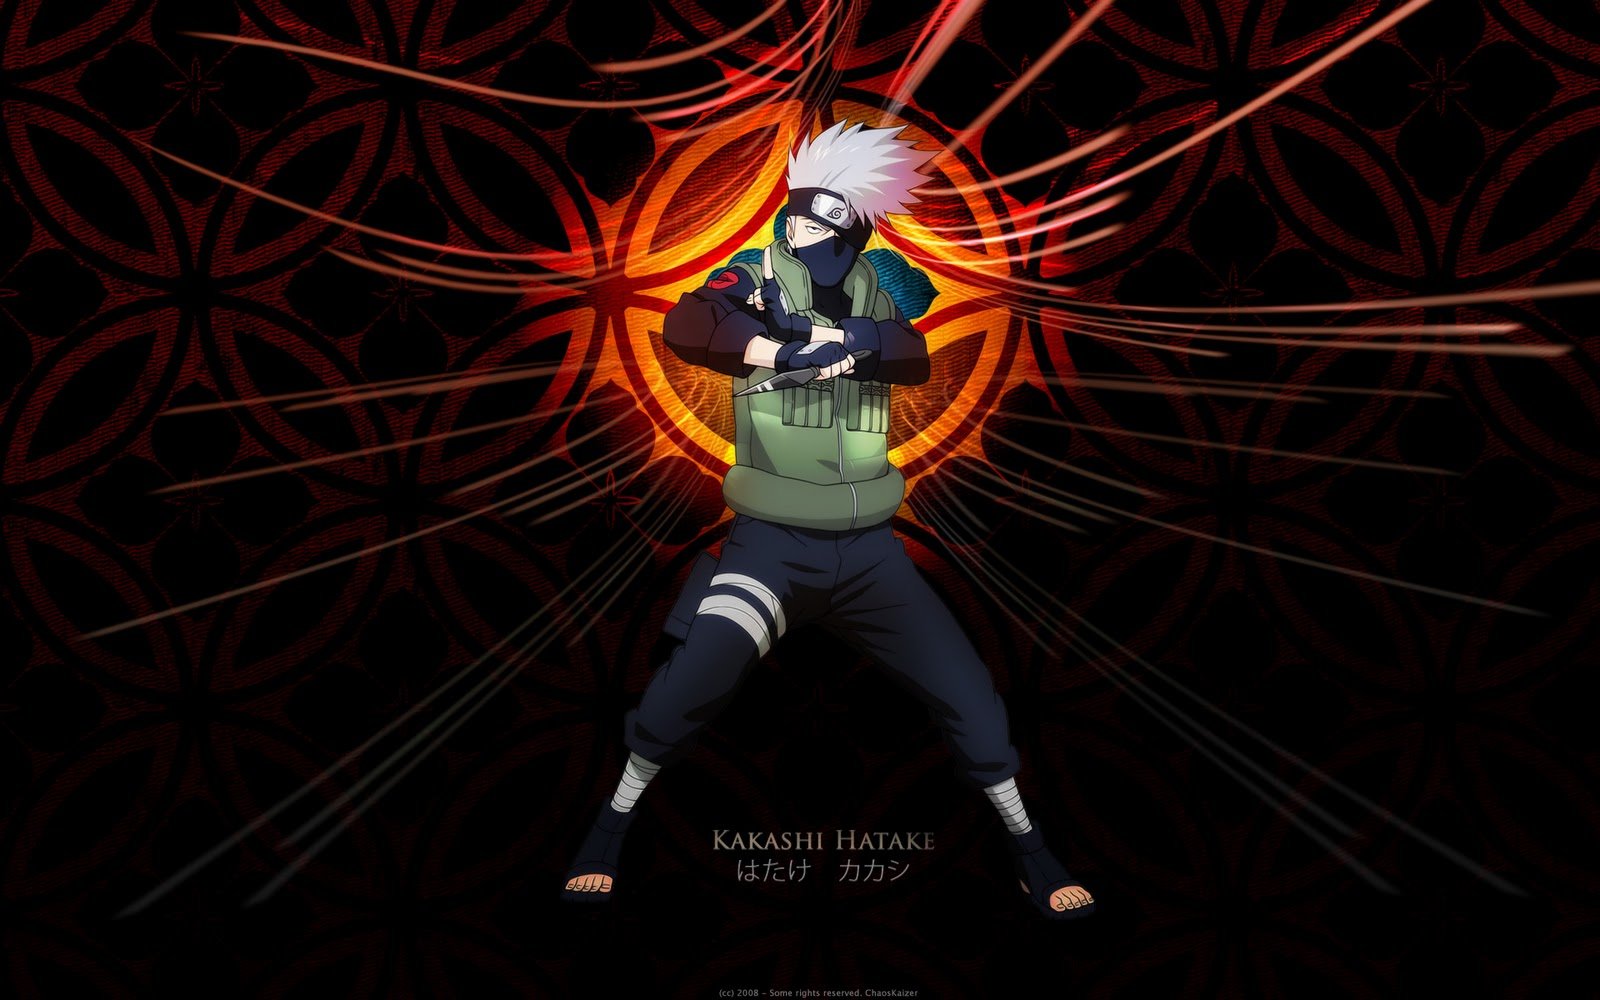  Naruto Shippuden Wallpaper 10226 Hd Wallpapers in Anime   Imagescicom